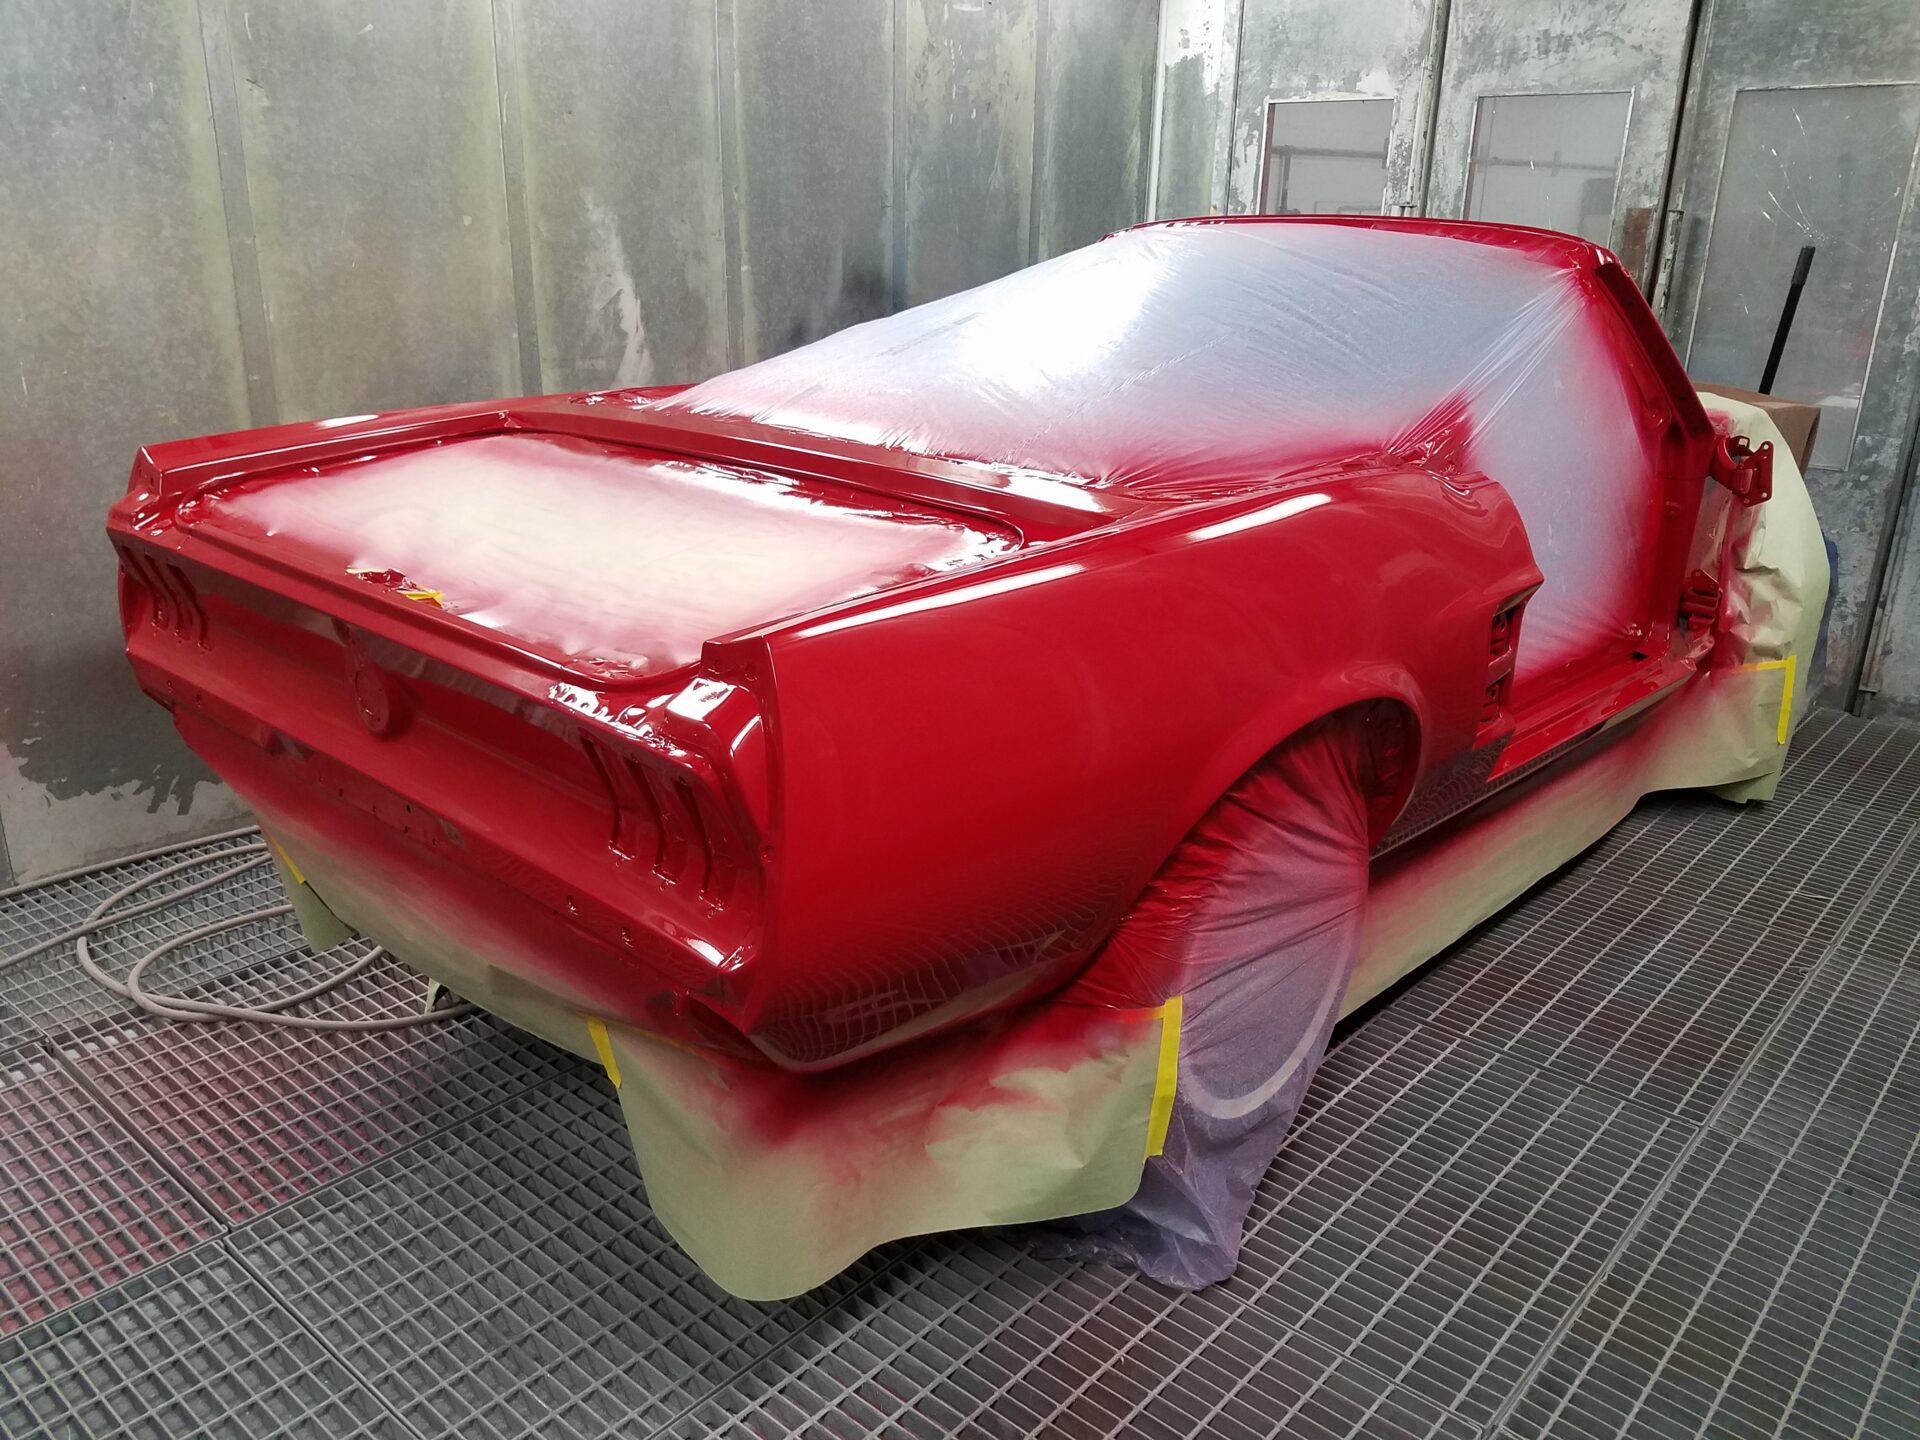 A newly painted red 1967 Ford Mustang Convertible